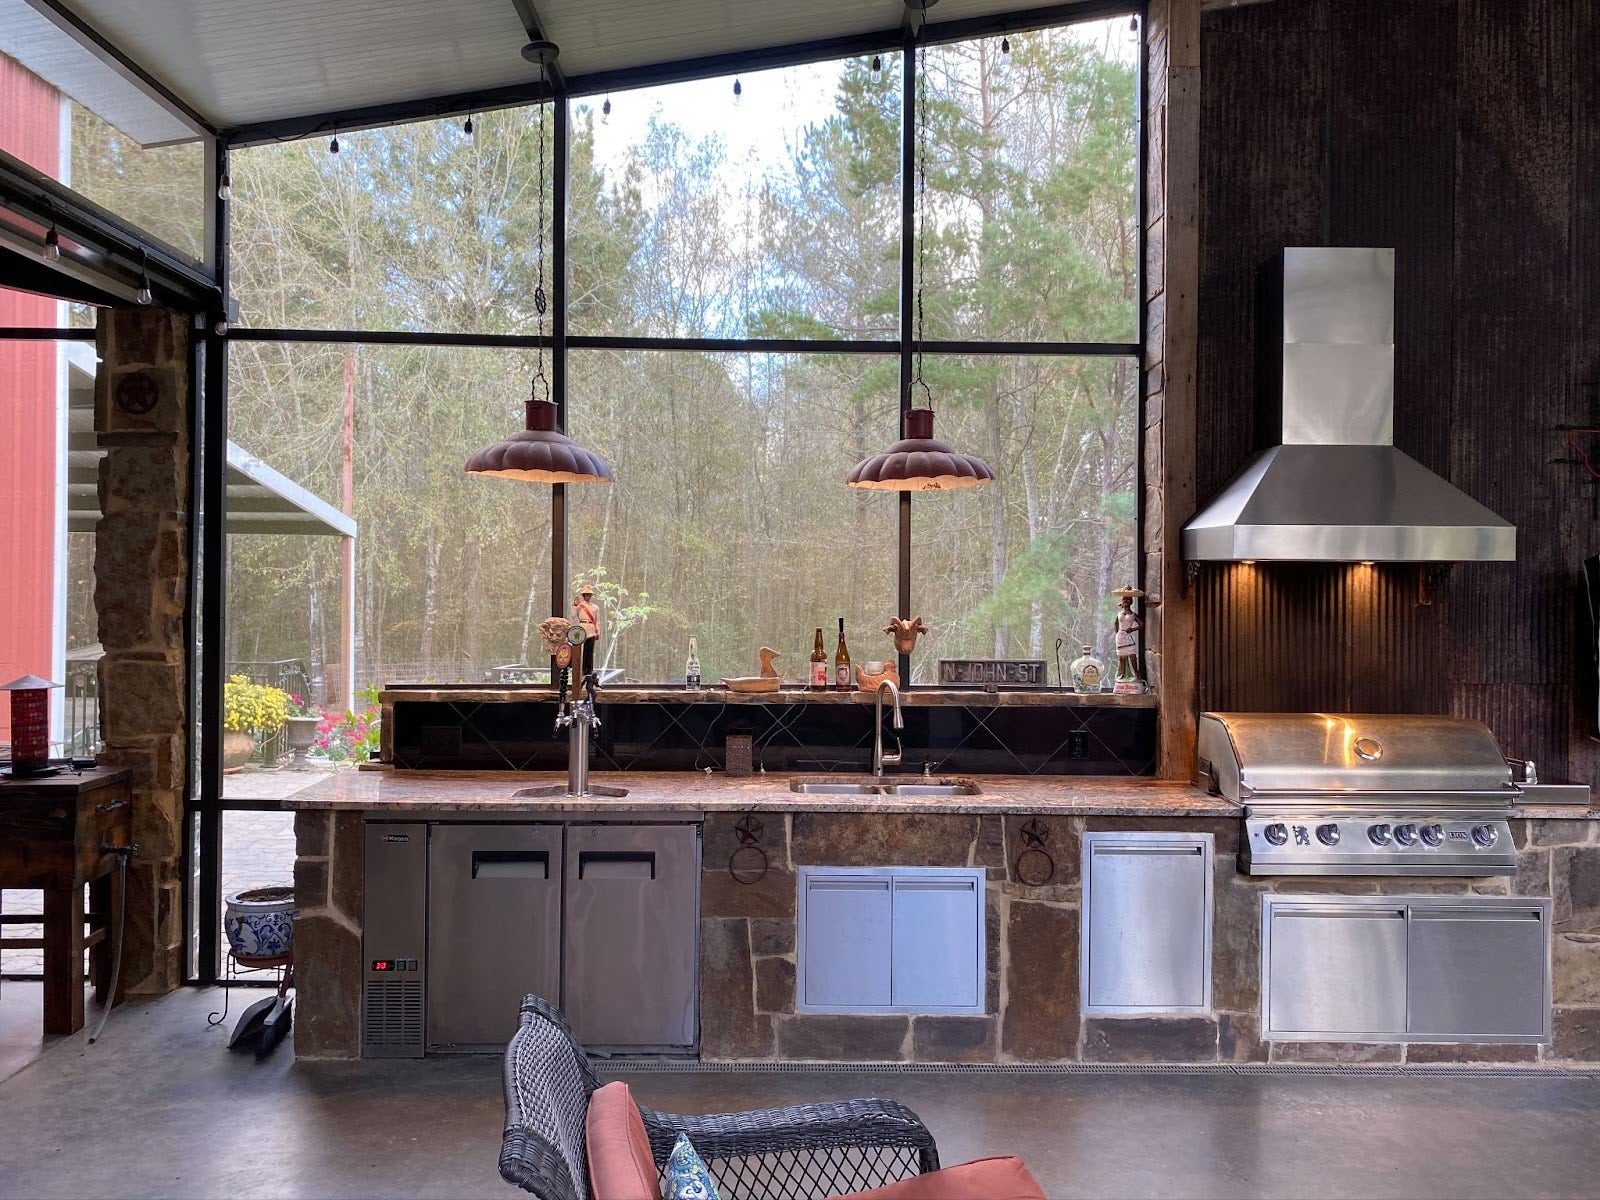 Screened porch transformed into a gourmet outdoor kitchen, featuring a Proline range hood, stone bar, and charming pendant lights, nestled in a natural forest setting - prolinerangehoods.com